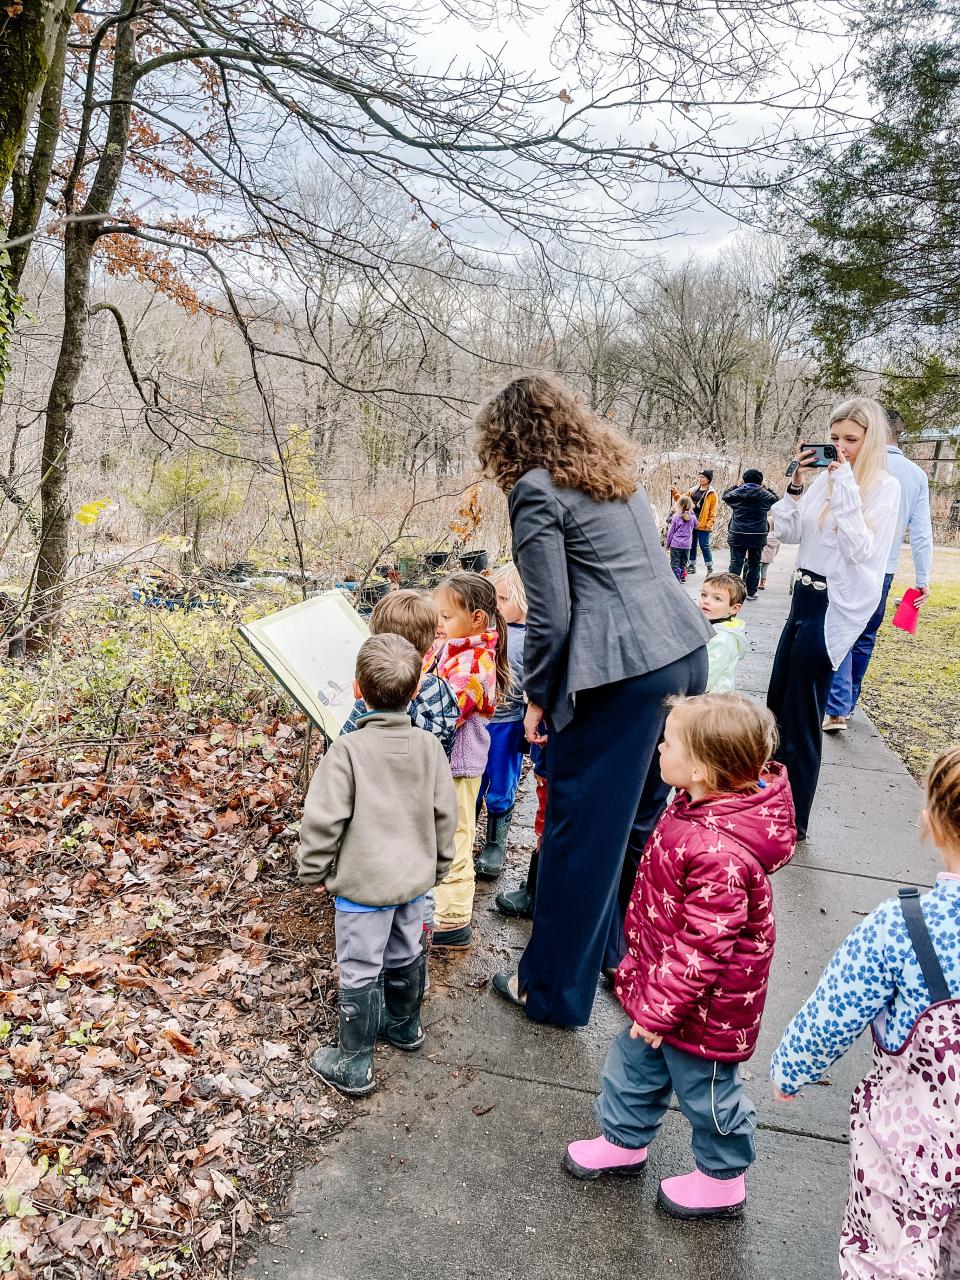 Ijams Nature Preschool participants were some of the first children to get to explore the new Storybook Trail on Nov. 30, 2022.